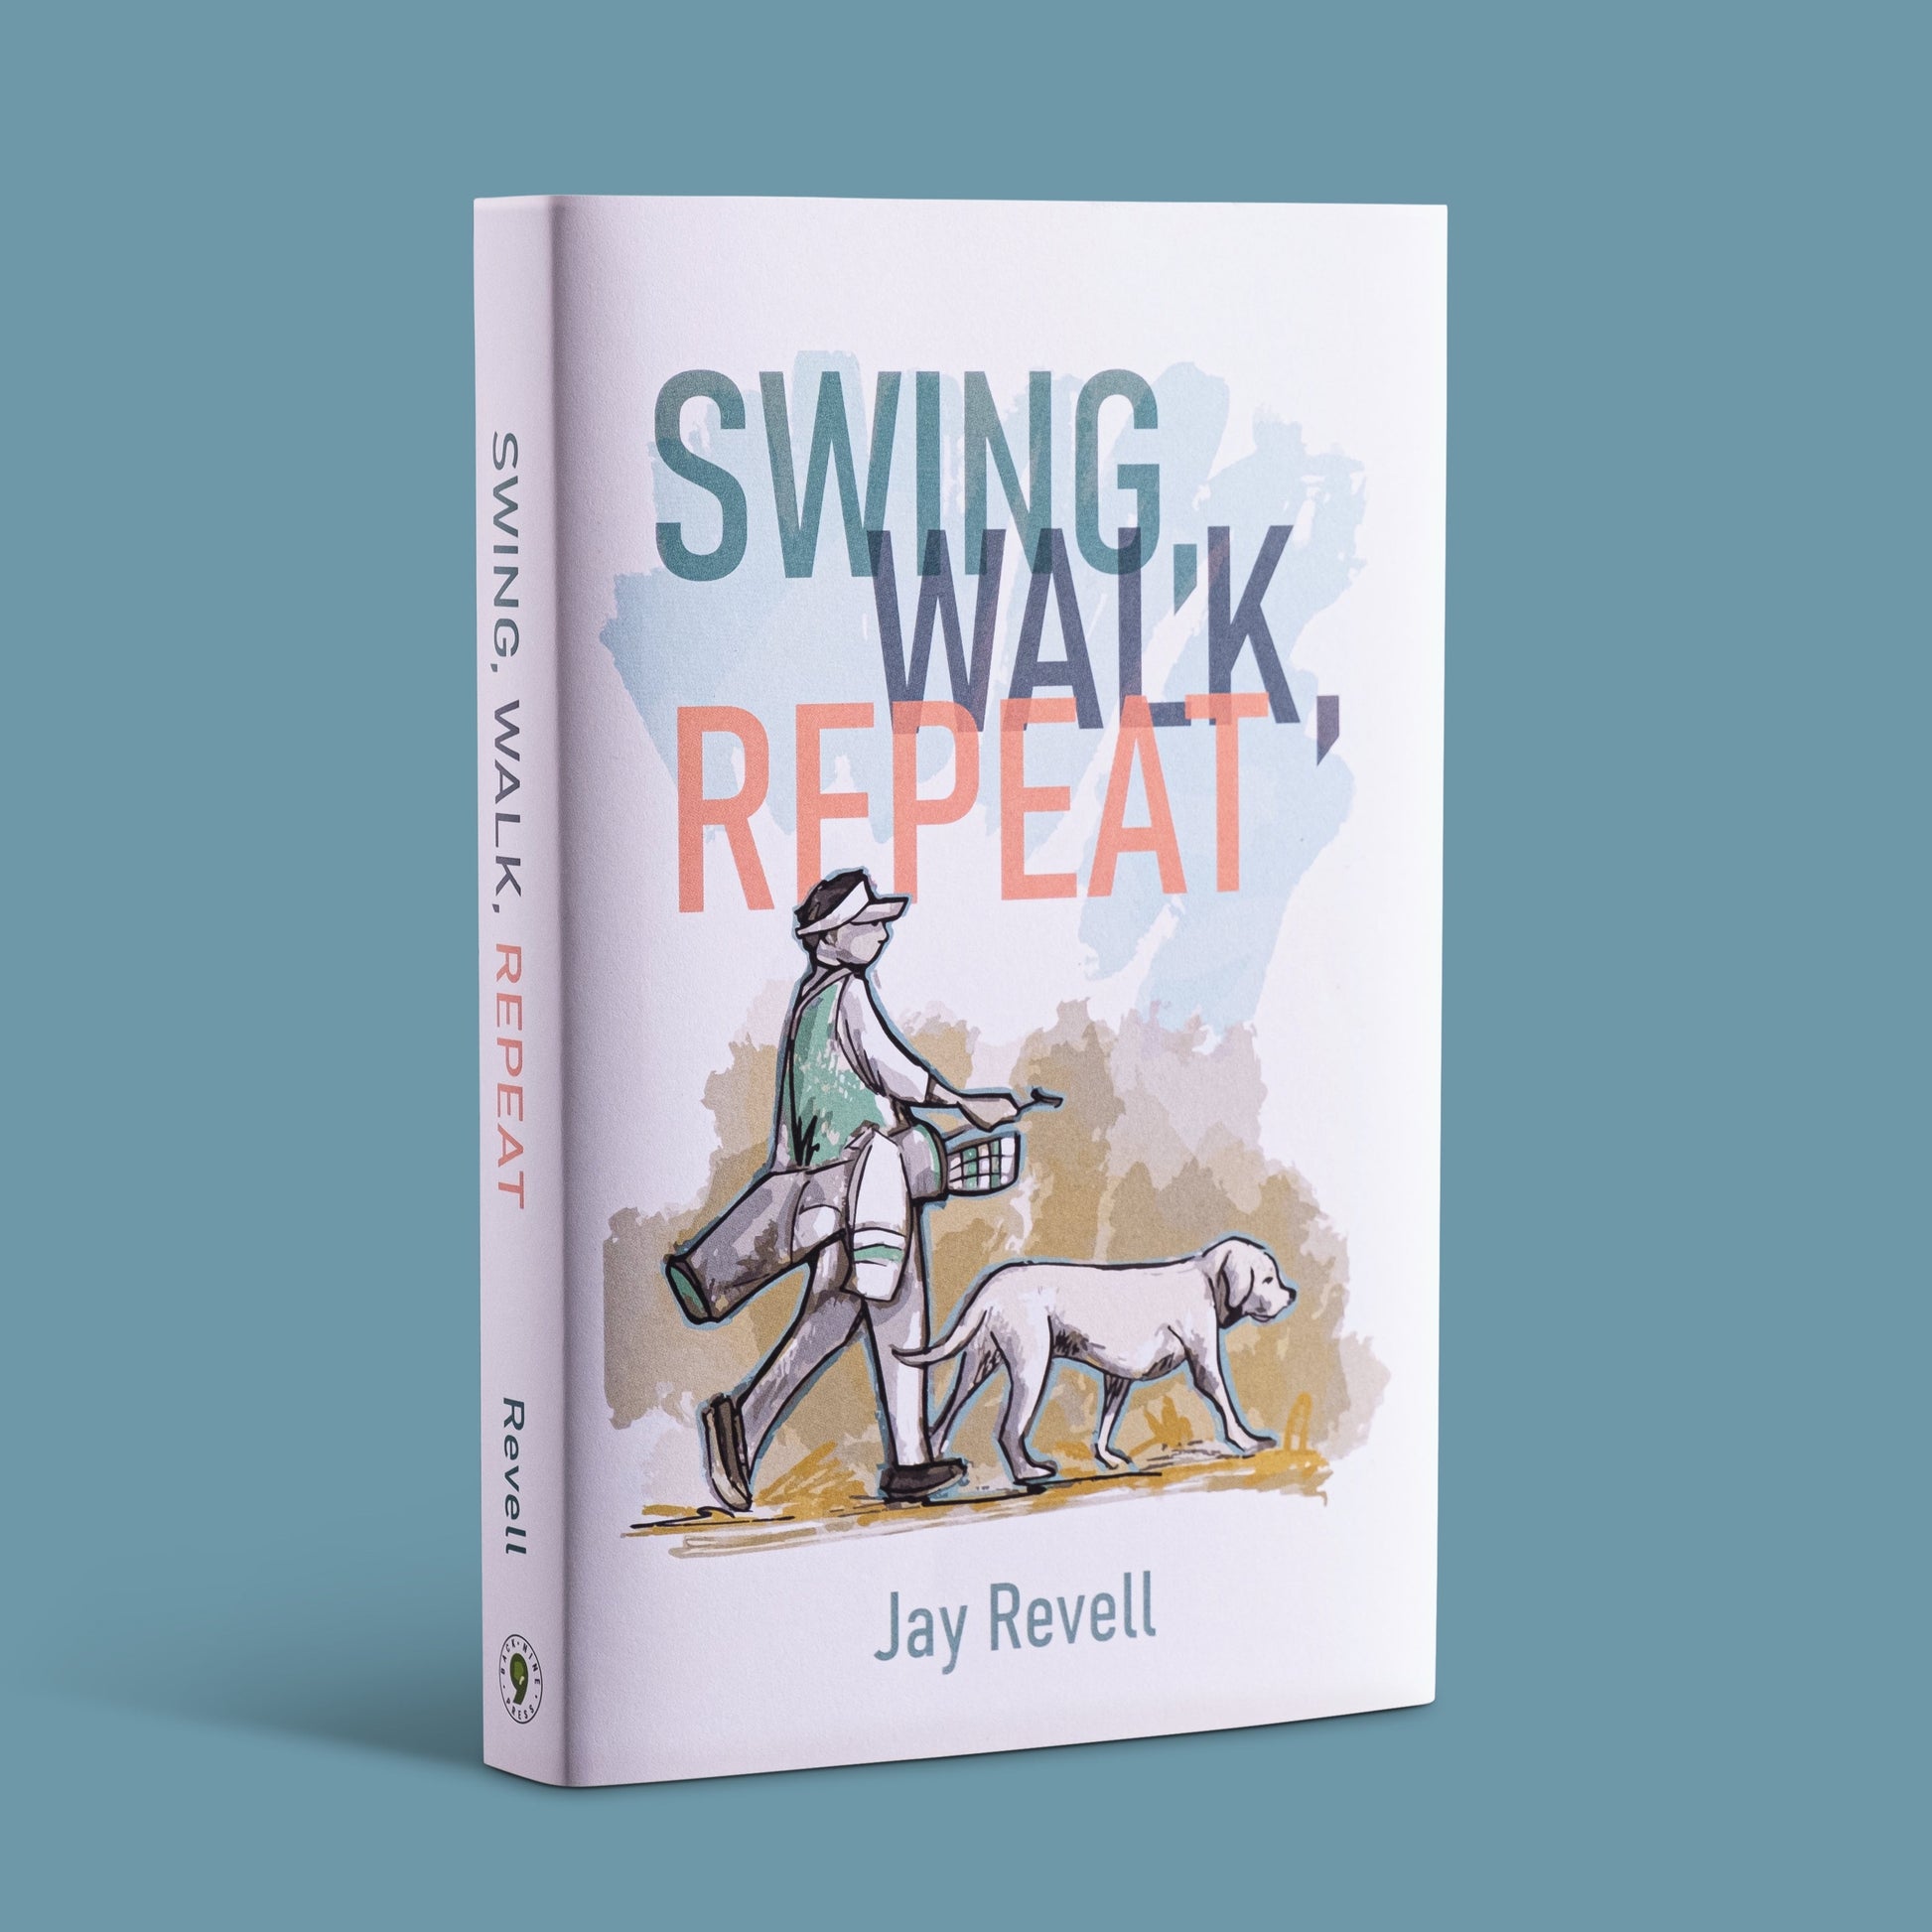 Swing Walk Repeat by Jay Revell